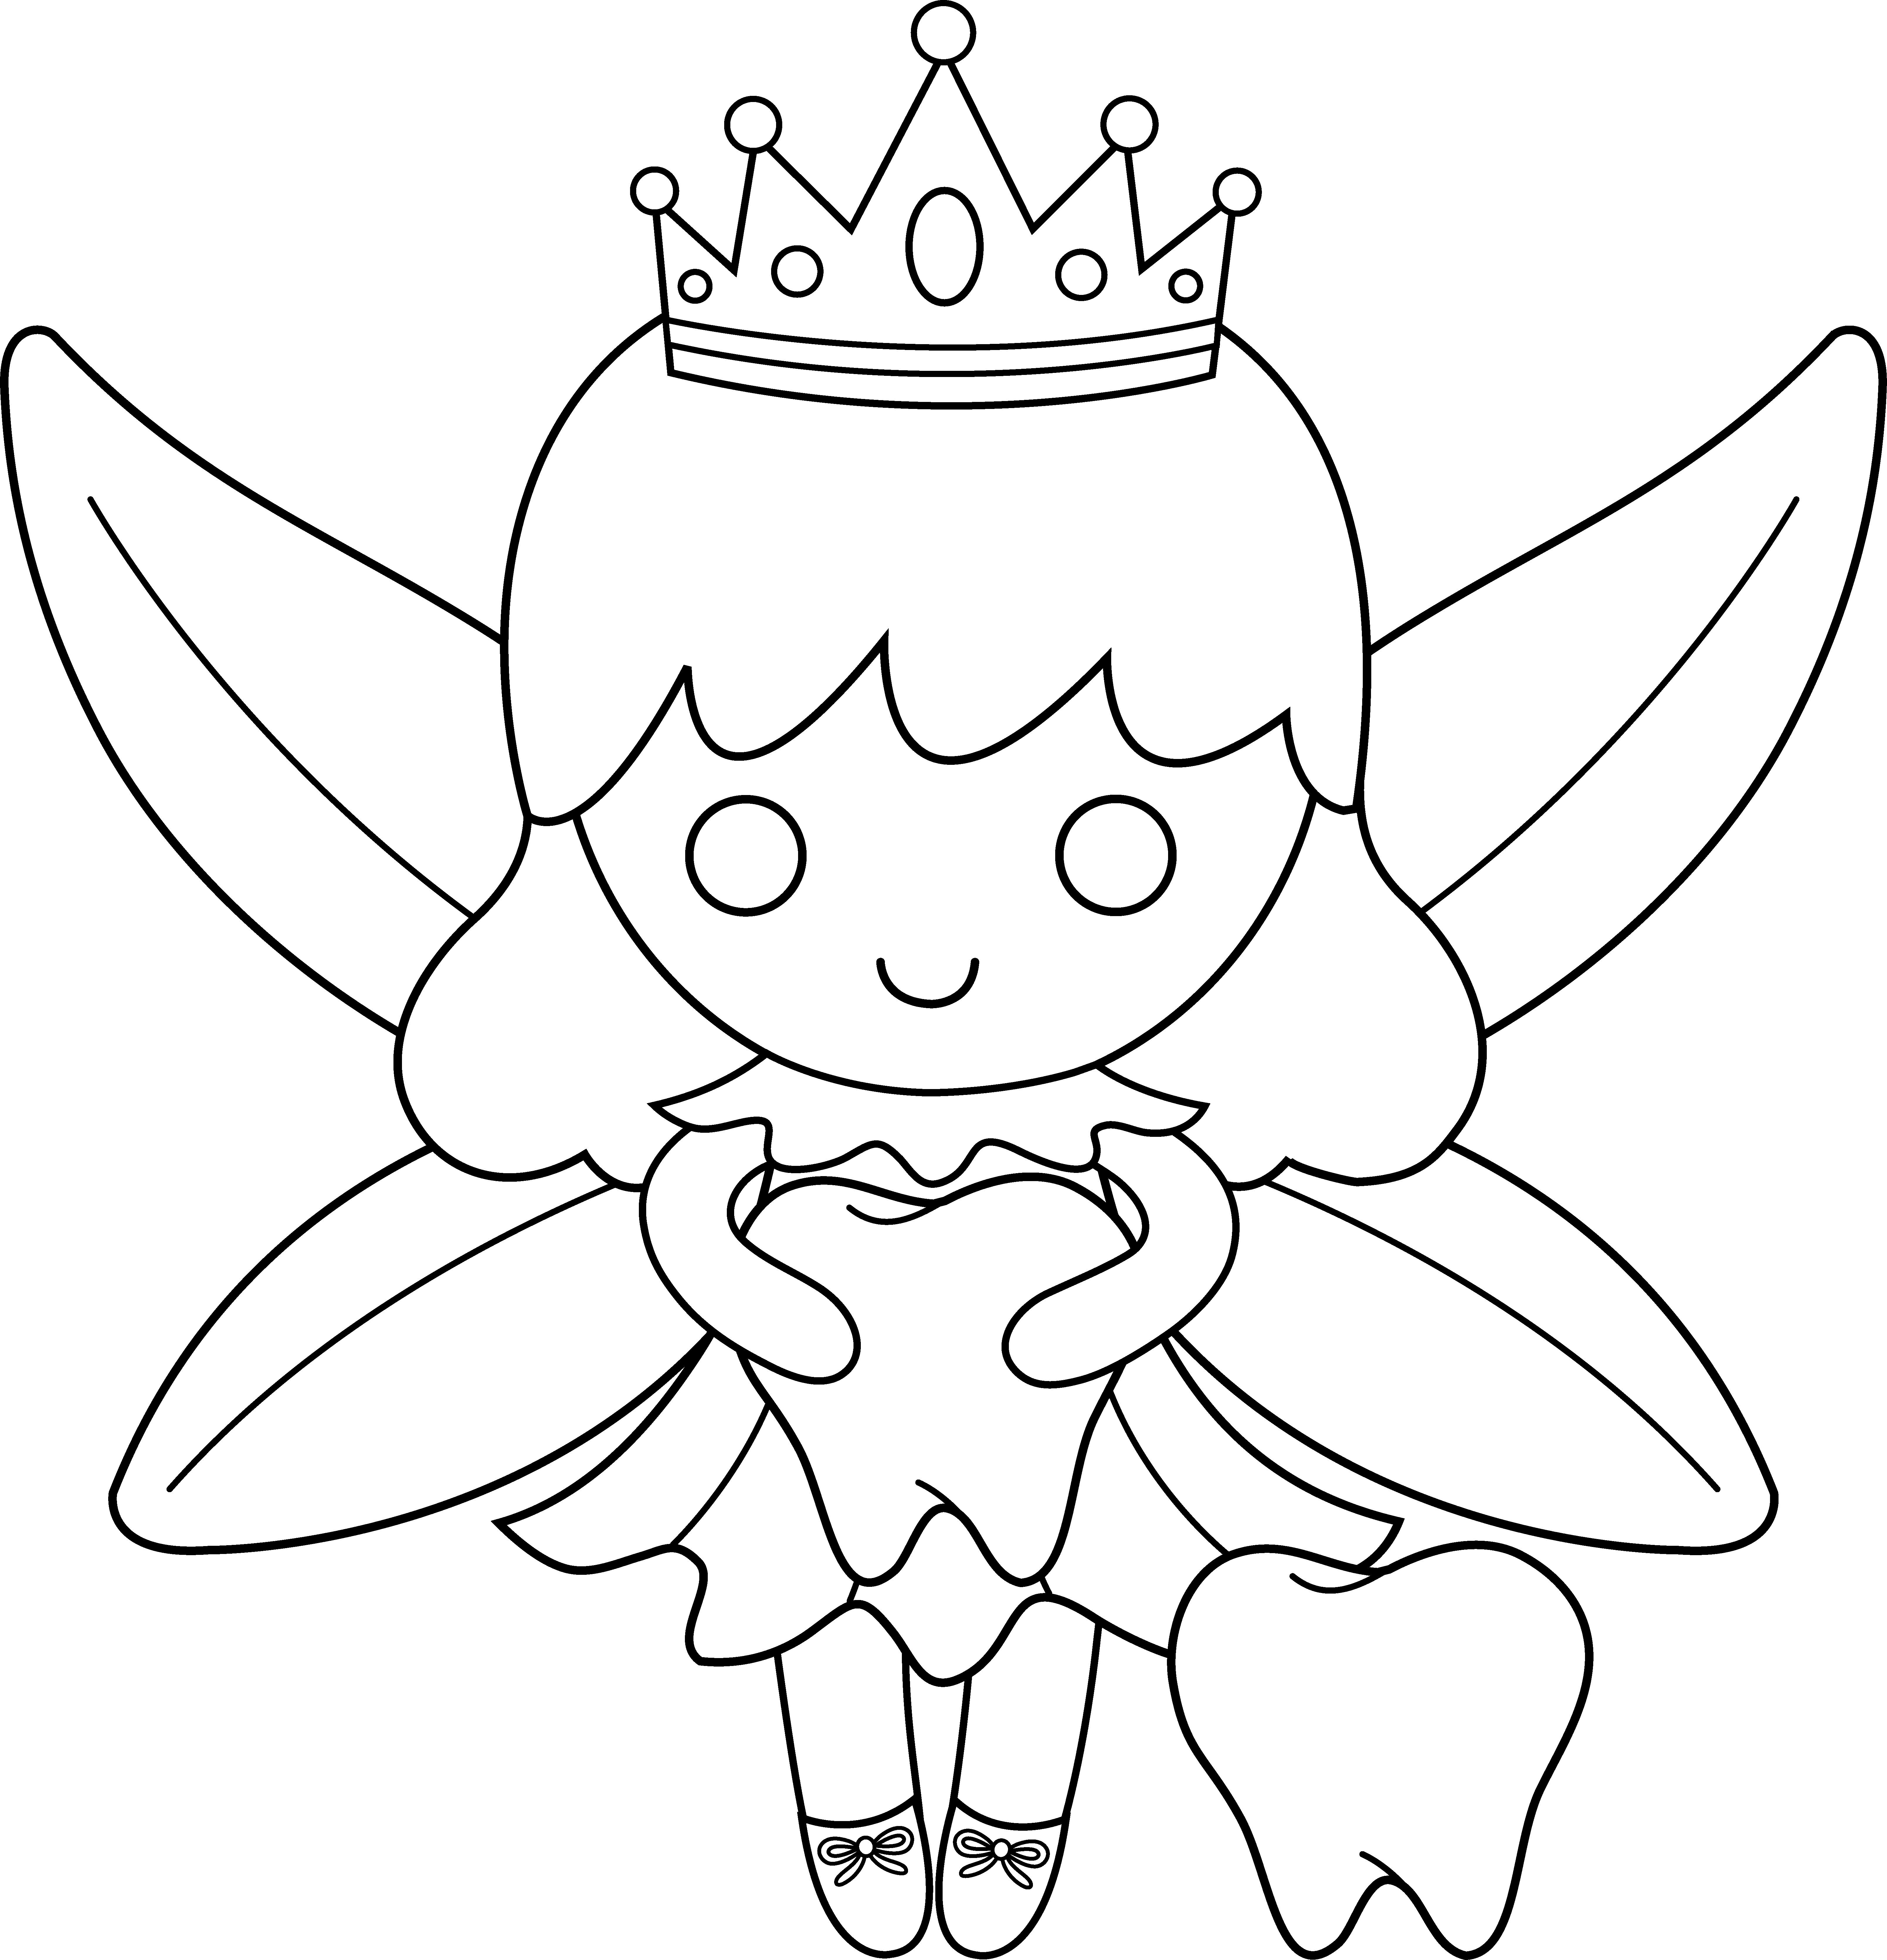 Forest Fairy Dancing Simple Drawing Colouring Page for Kids | MUSE AI